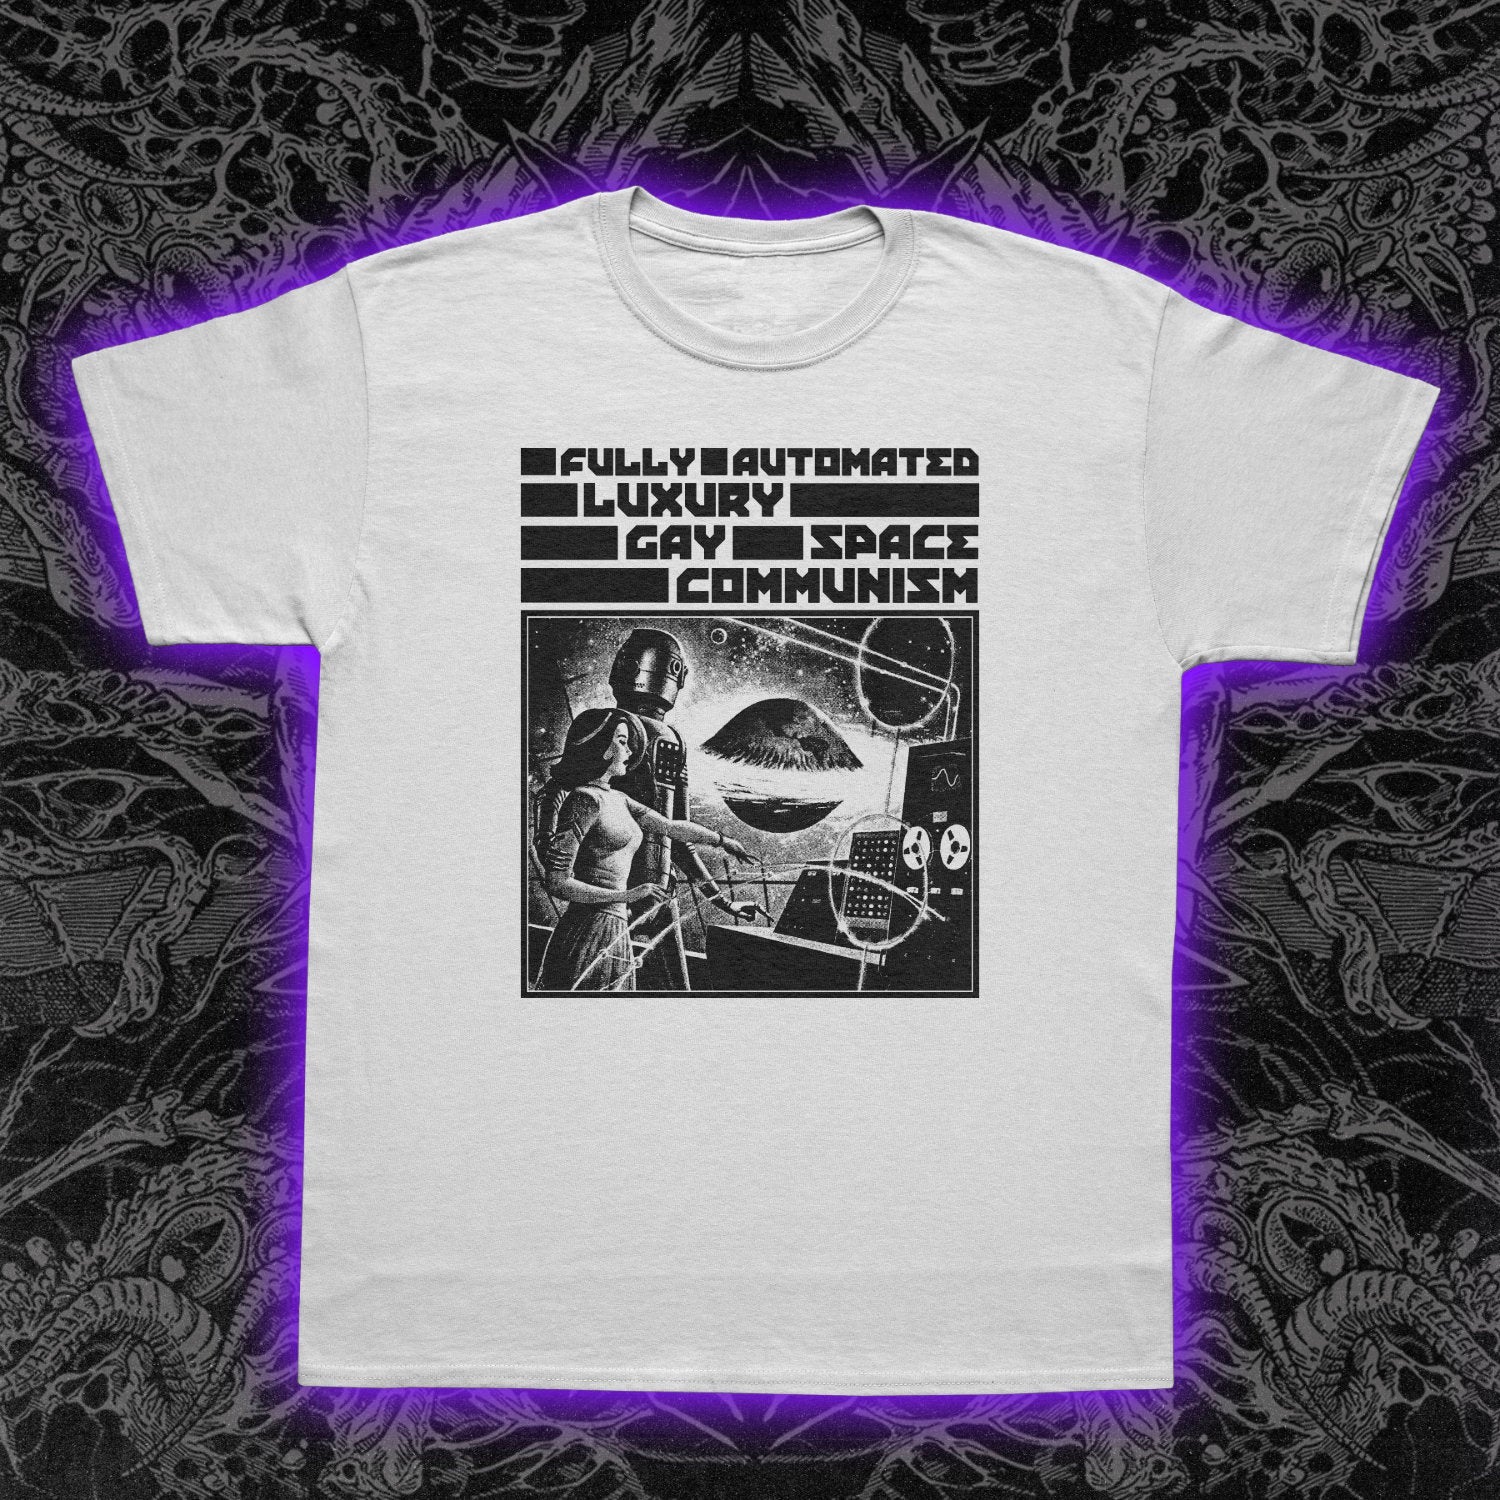 Fully Automated Luxury Gay Space Communism Premium Tee